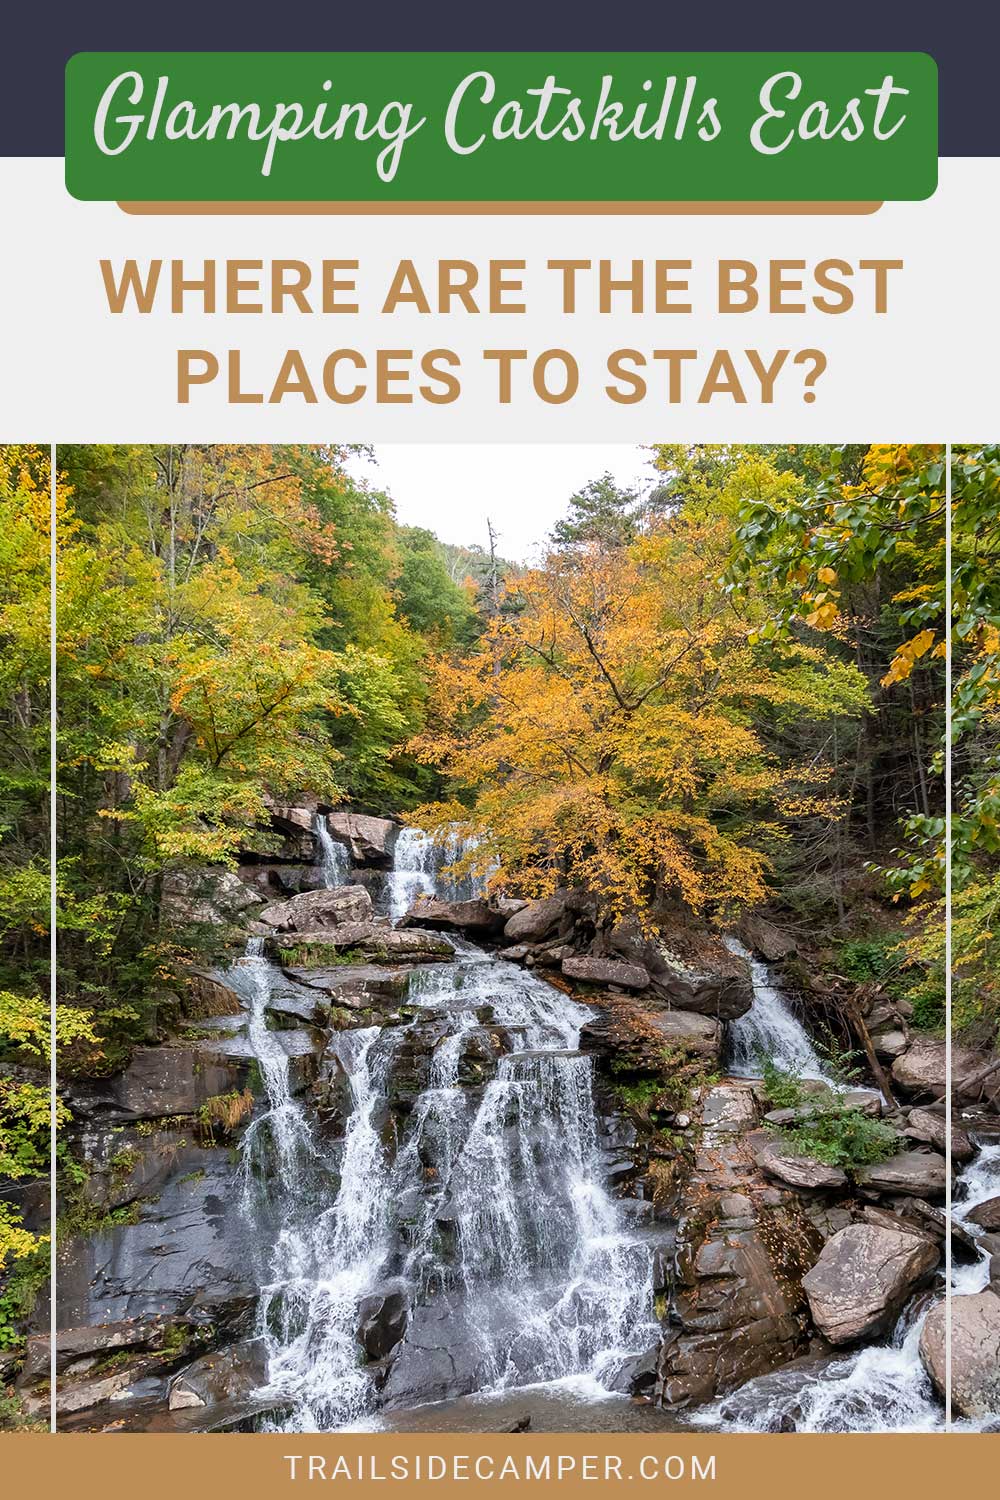 Glamping Catskills East – Where are the Best Places To Stay?